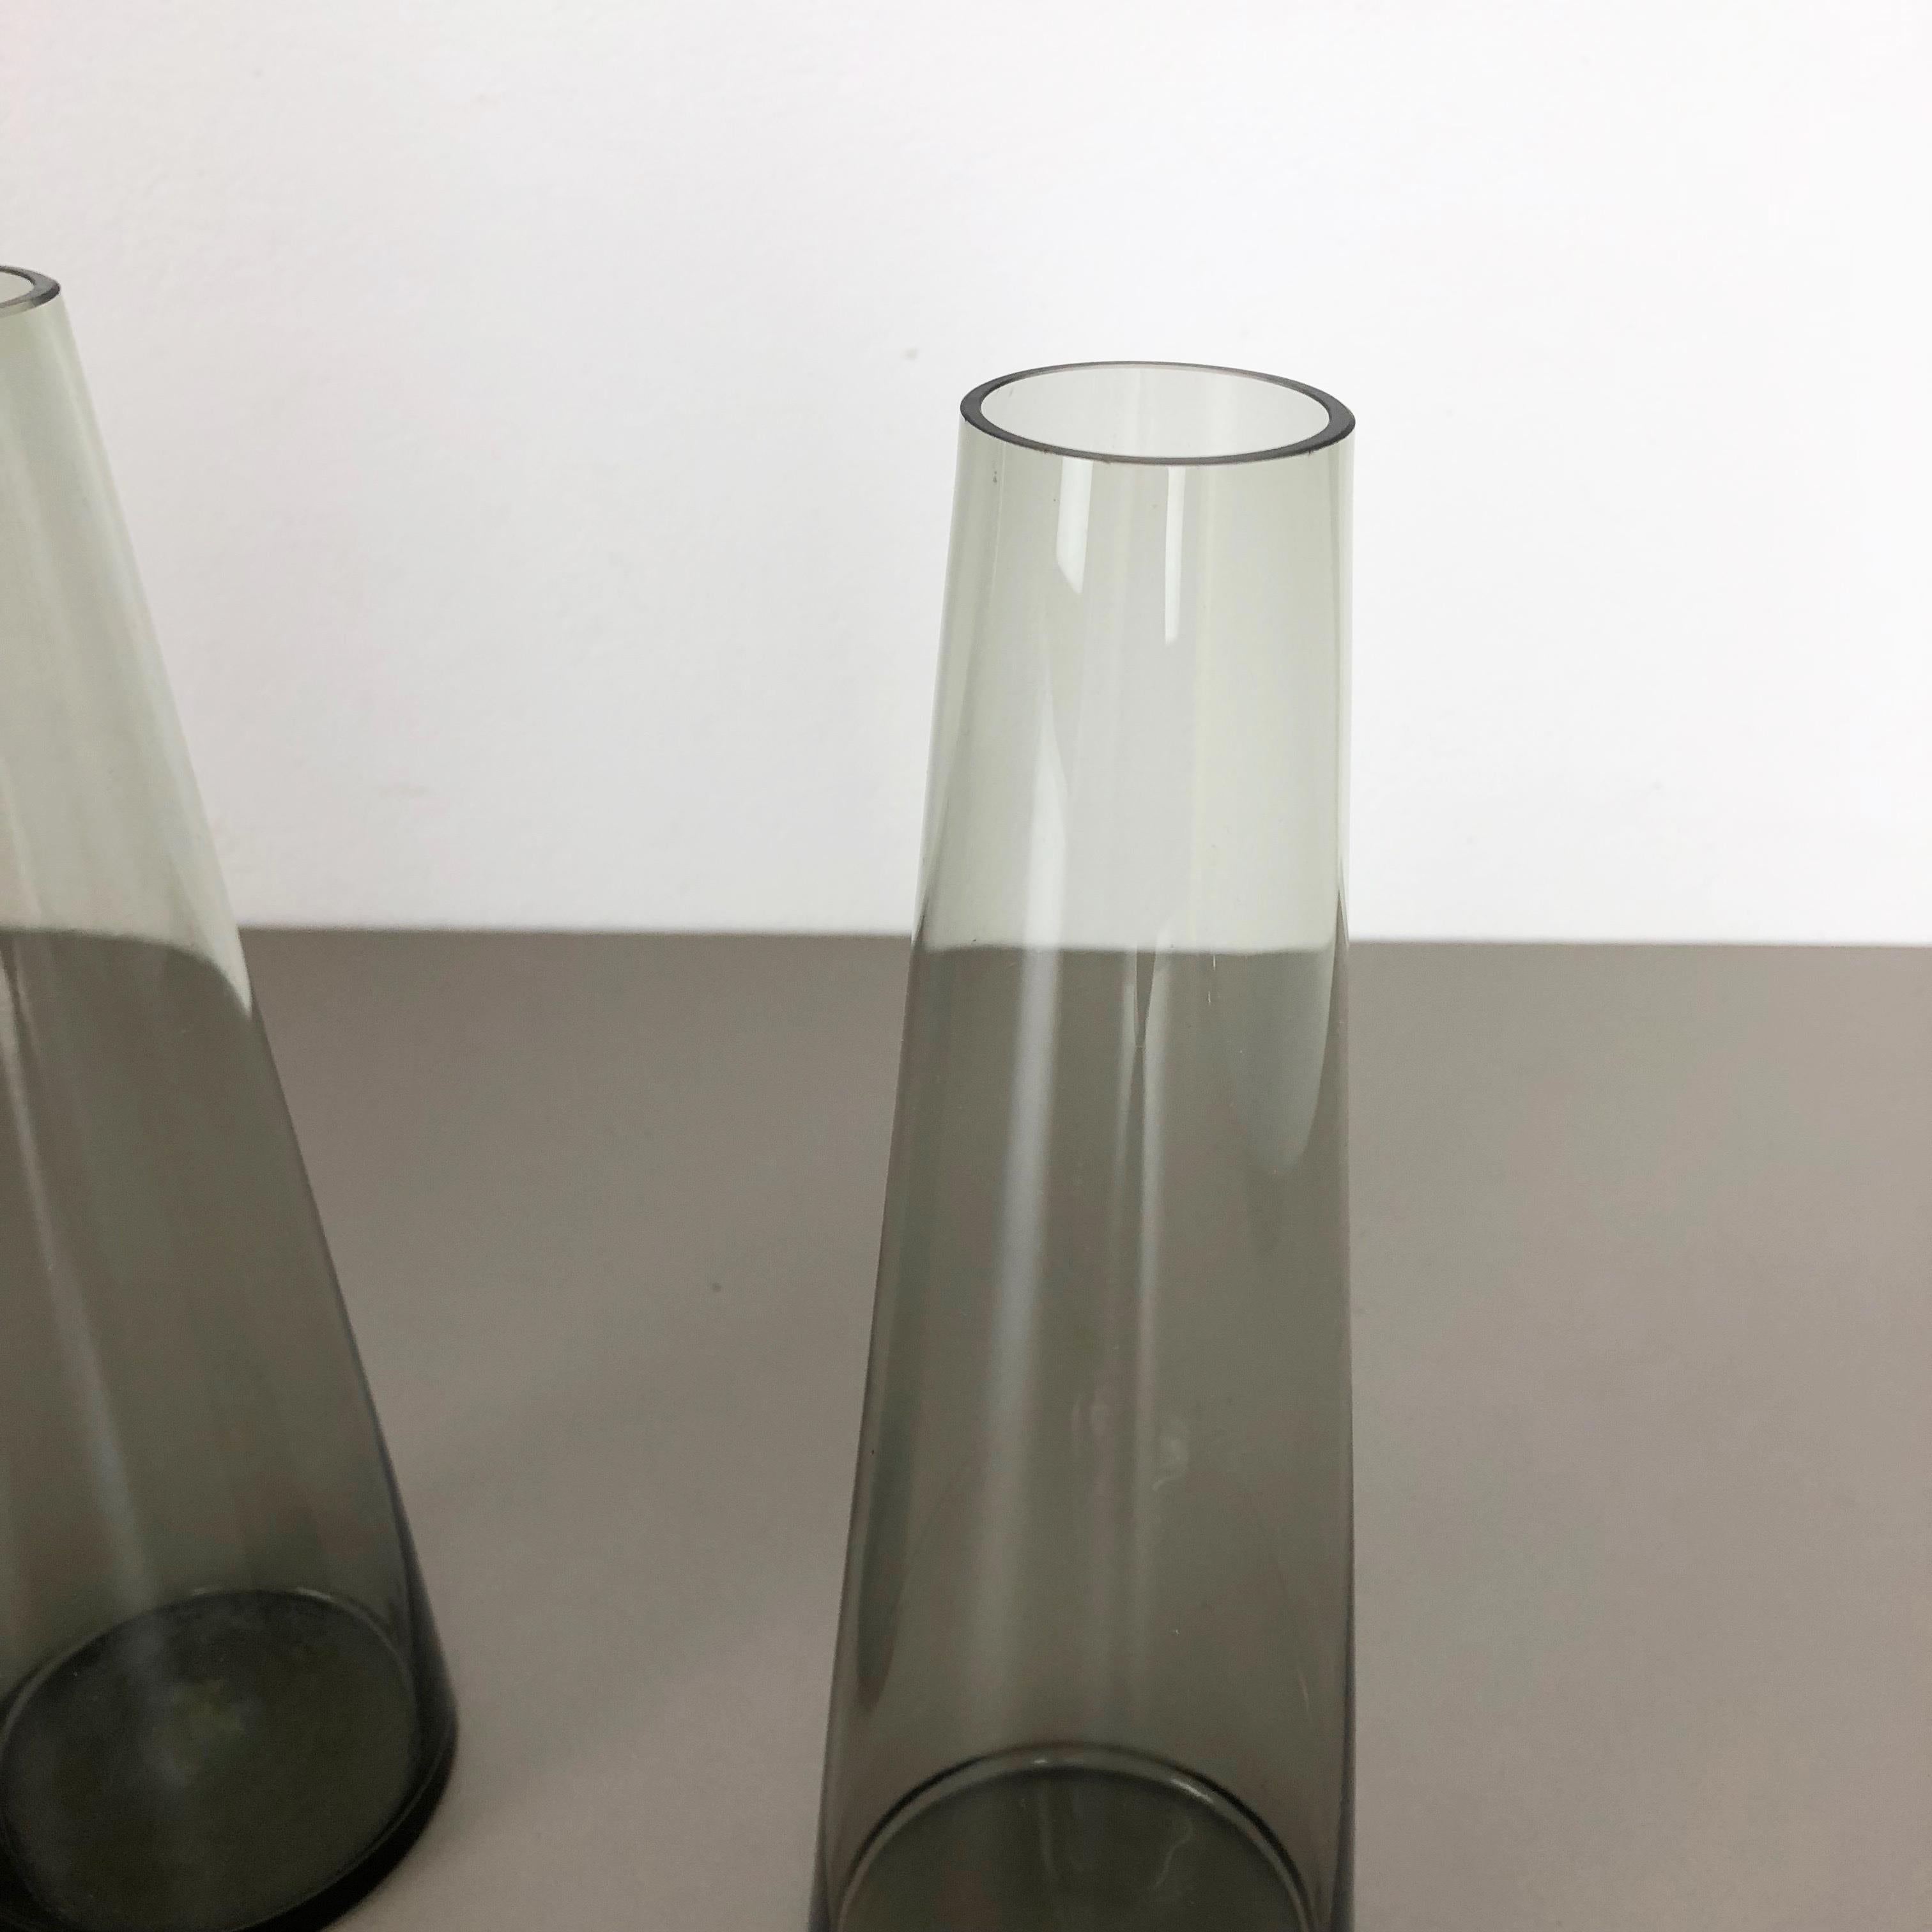 Vintage 1960s Set of 2 Turmalin Vases by Wilhelm Wagenfeld for WMF, Germany For Sale 1